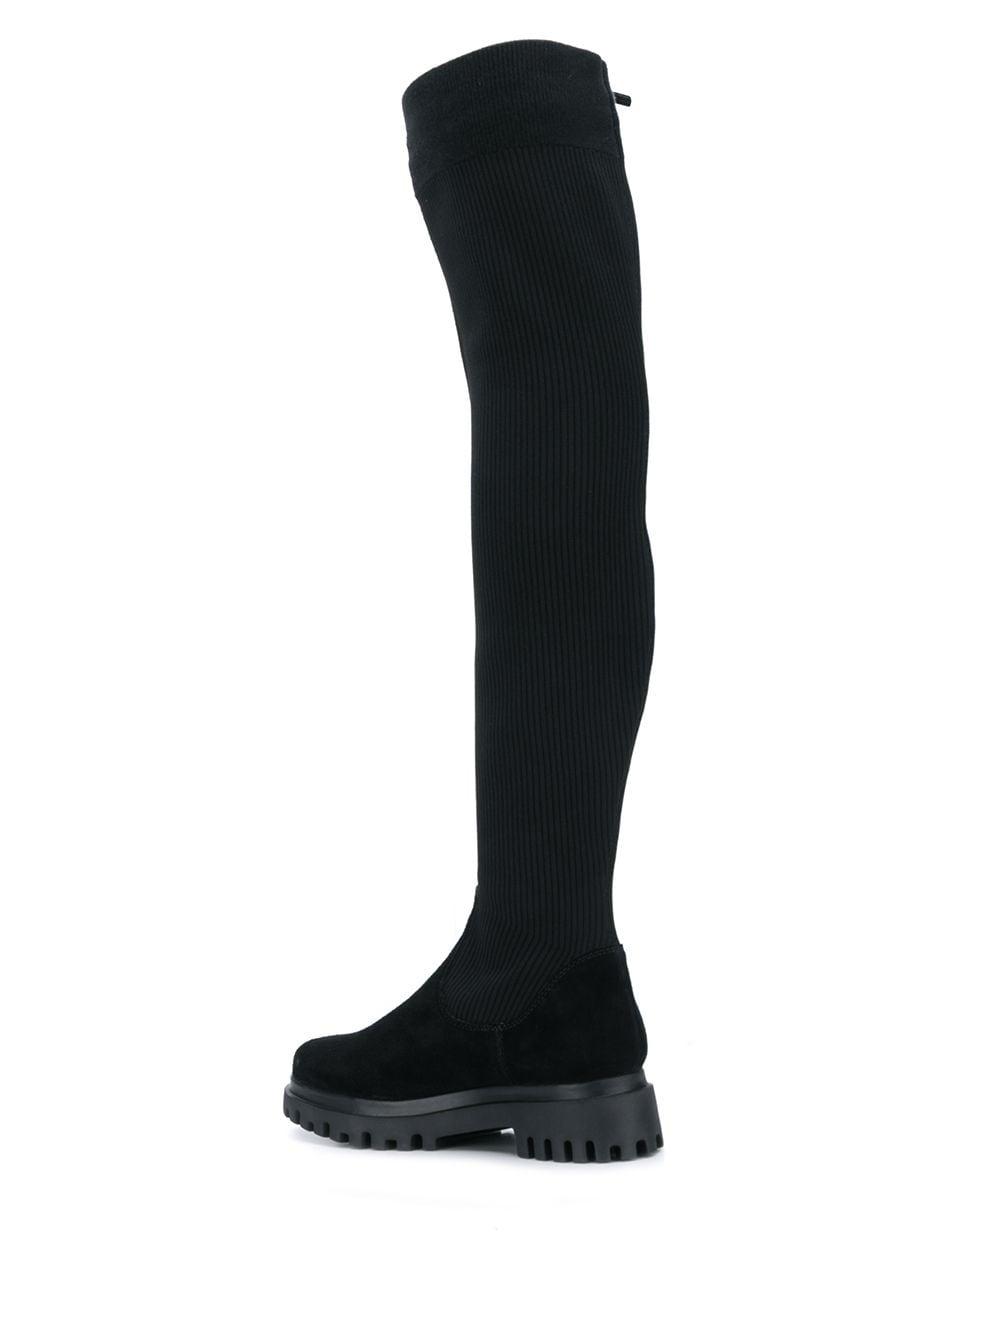 Tommy Hilfiger Denim Over The Knee Sock Boots in Black - Lyst